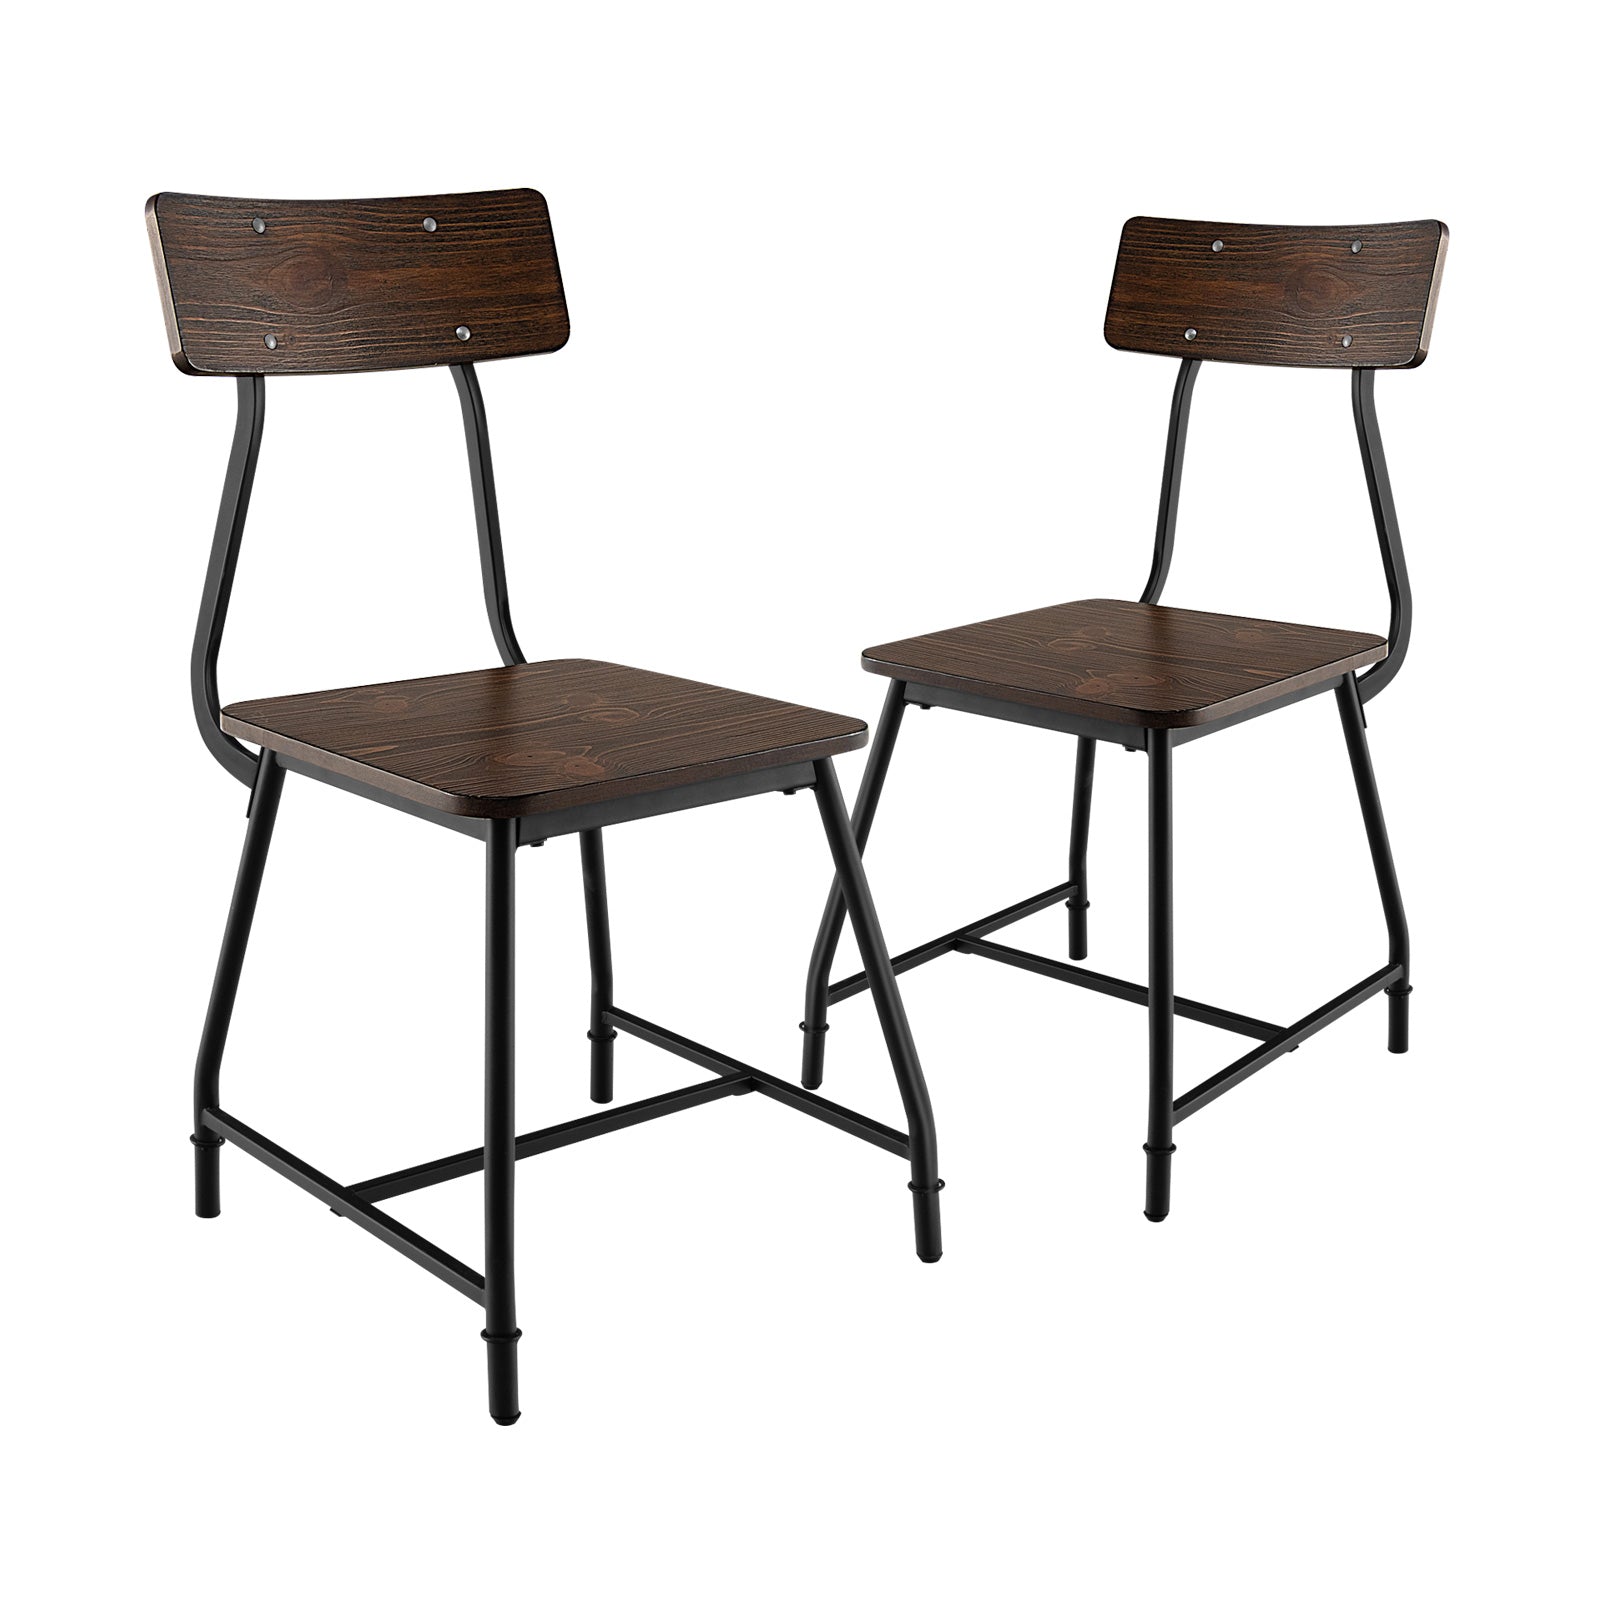 Set of 2 Dining Chair with Sturdy Metal Legs